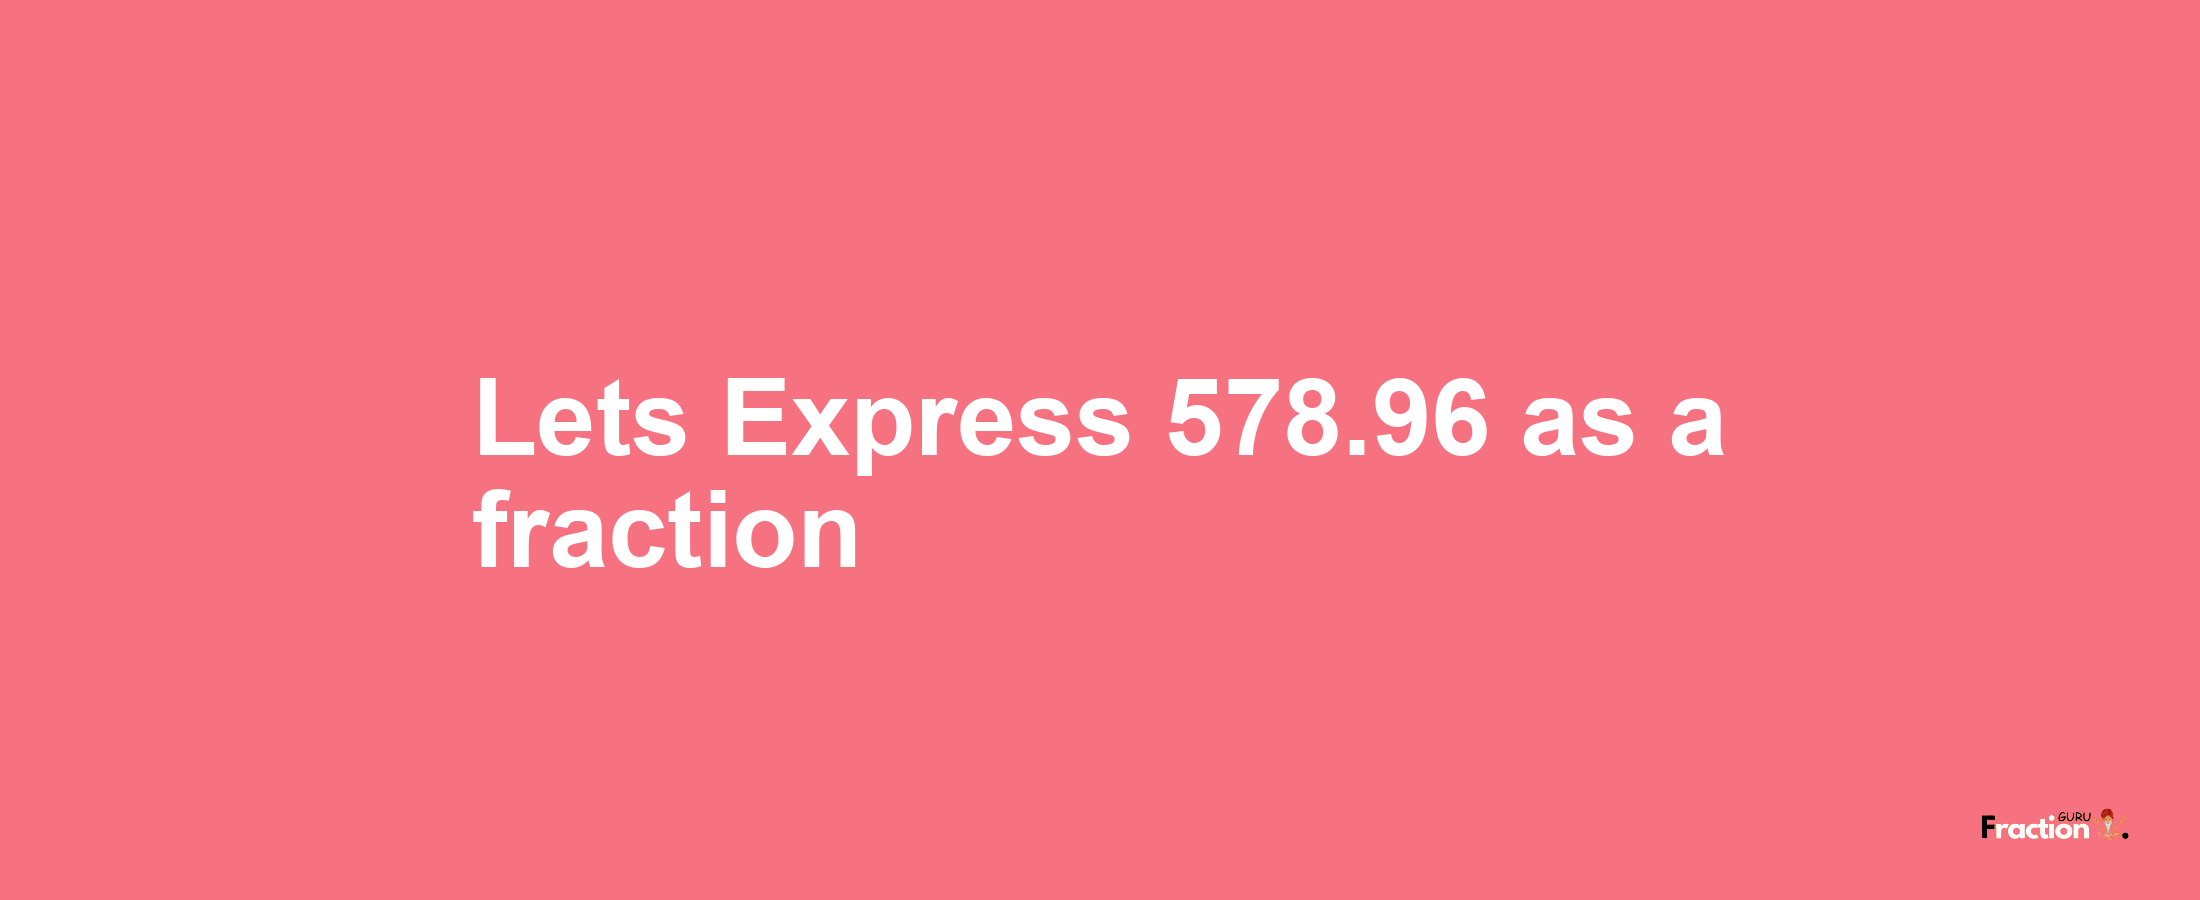 Lets Express 578.96 as afraction